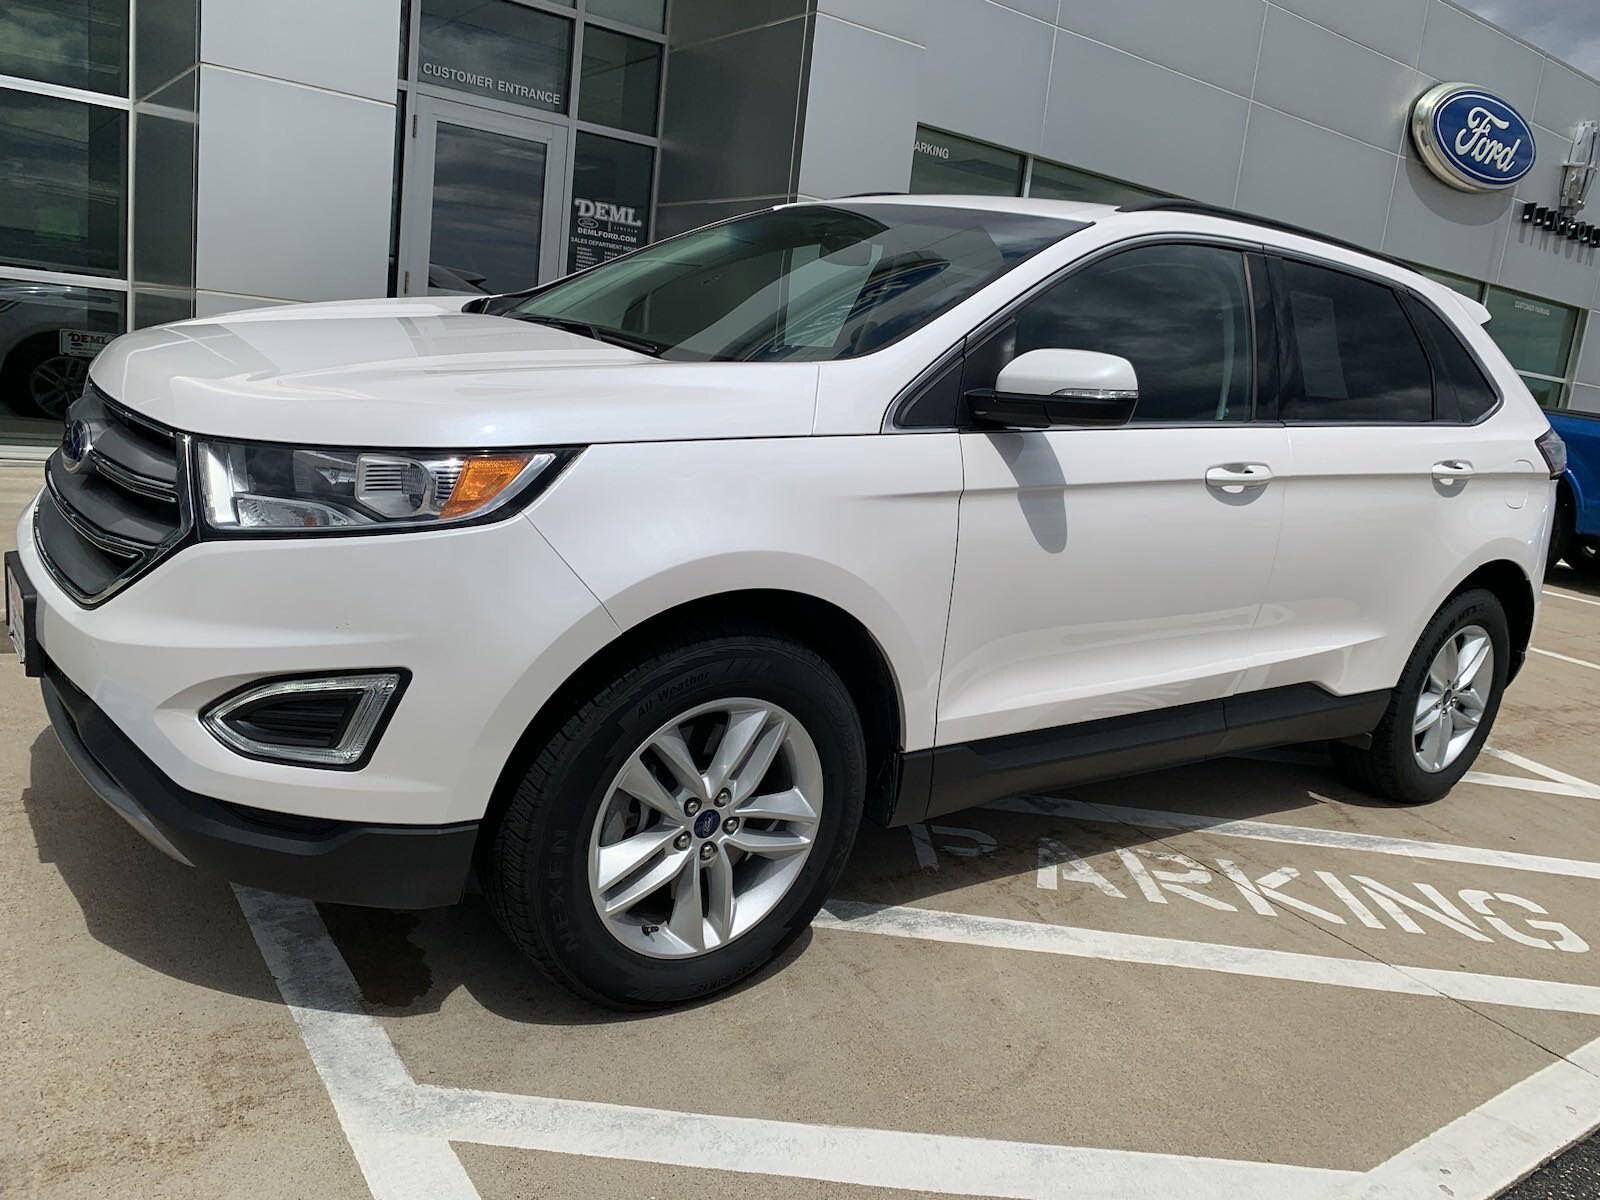 Used 2018 Ford Edge SEL with VIN 2FMPK4J84JBB30492 for sale in Waseca, Minnesota